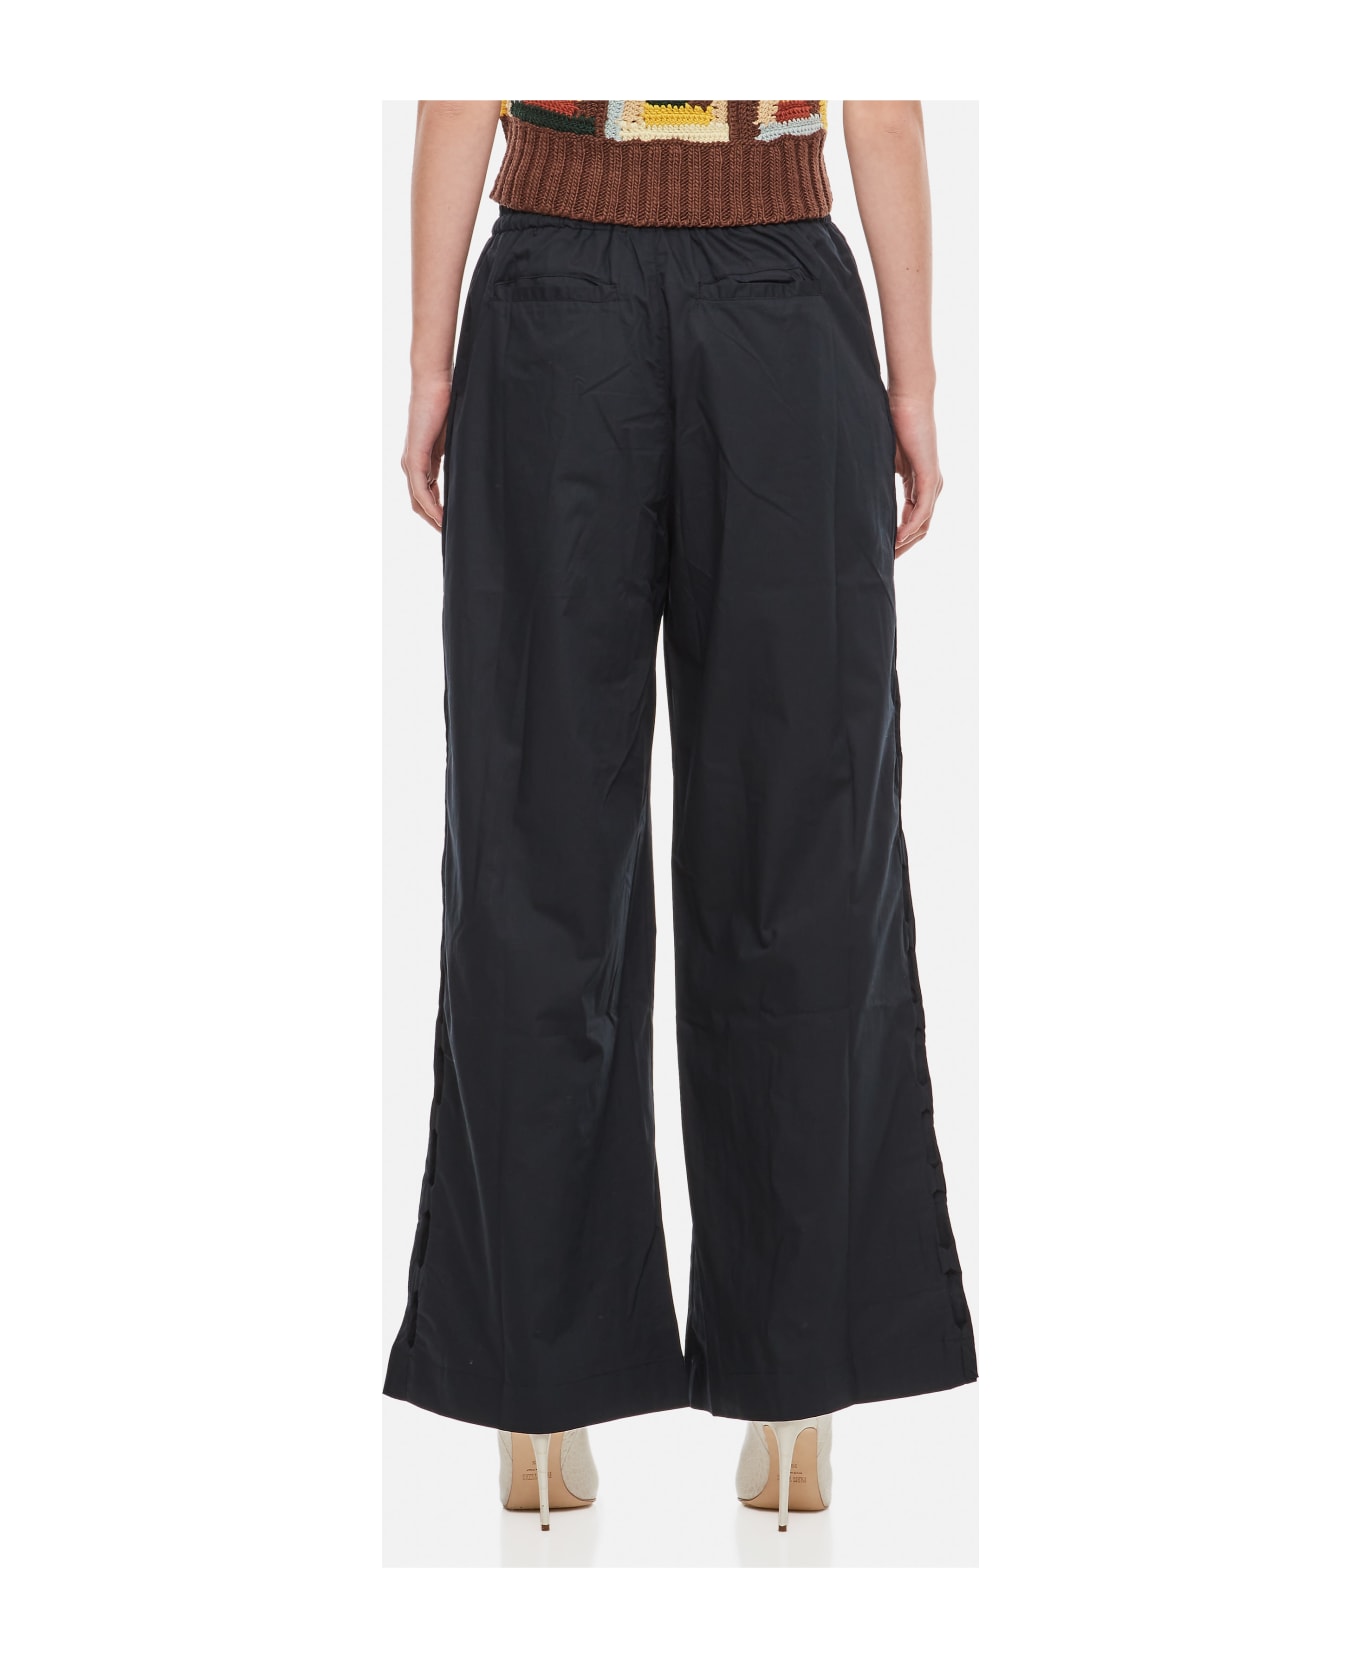 Sea New York Sia Solid Side Cut-out Pants - Black ボトムス